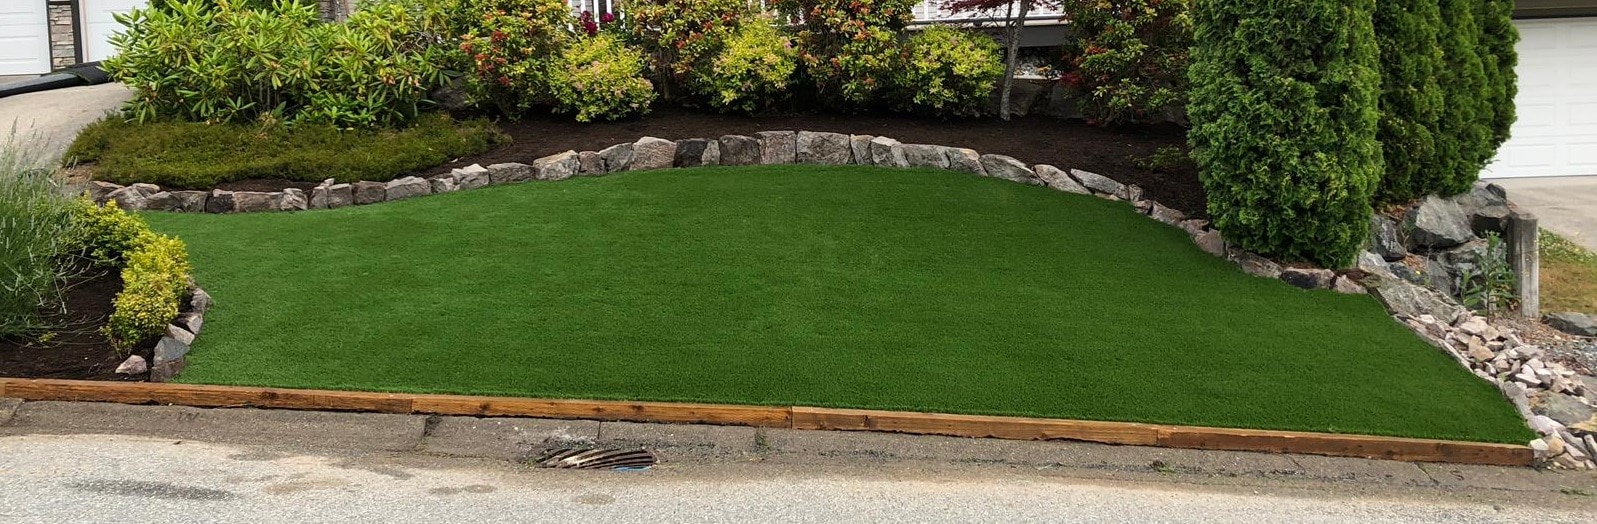 Premium Grass Blades Synthetic Artifical Turf  Abbotsford EverGreen Install Only Front Yard 3